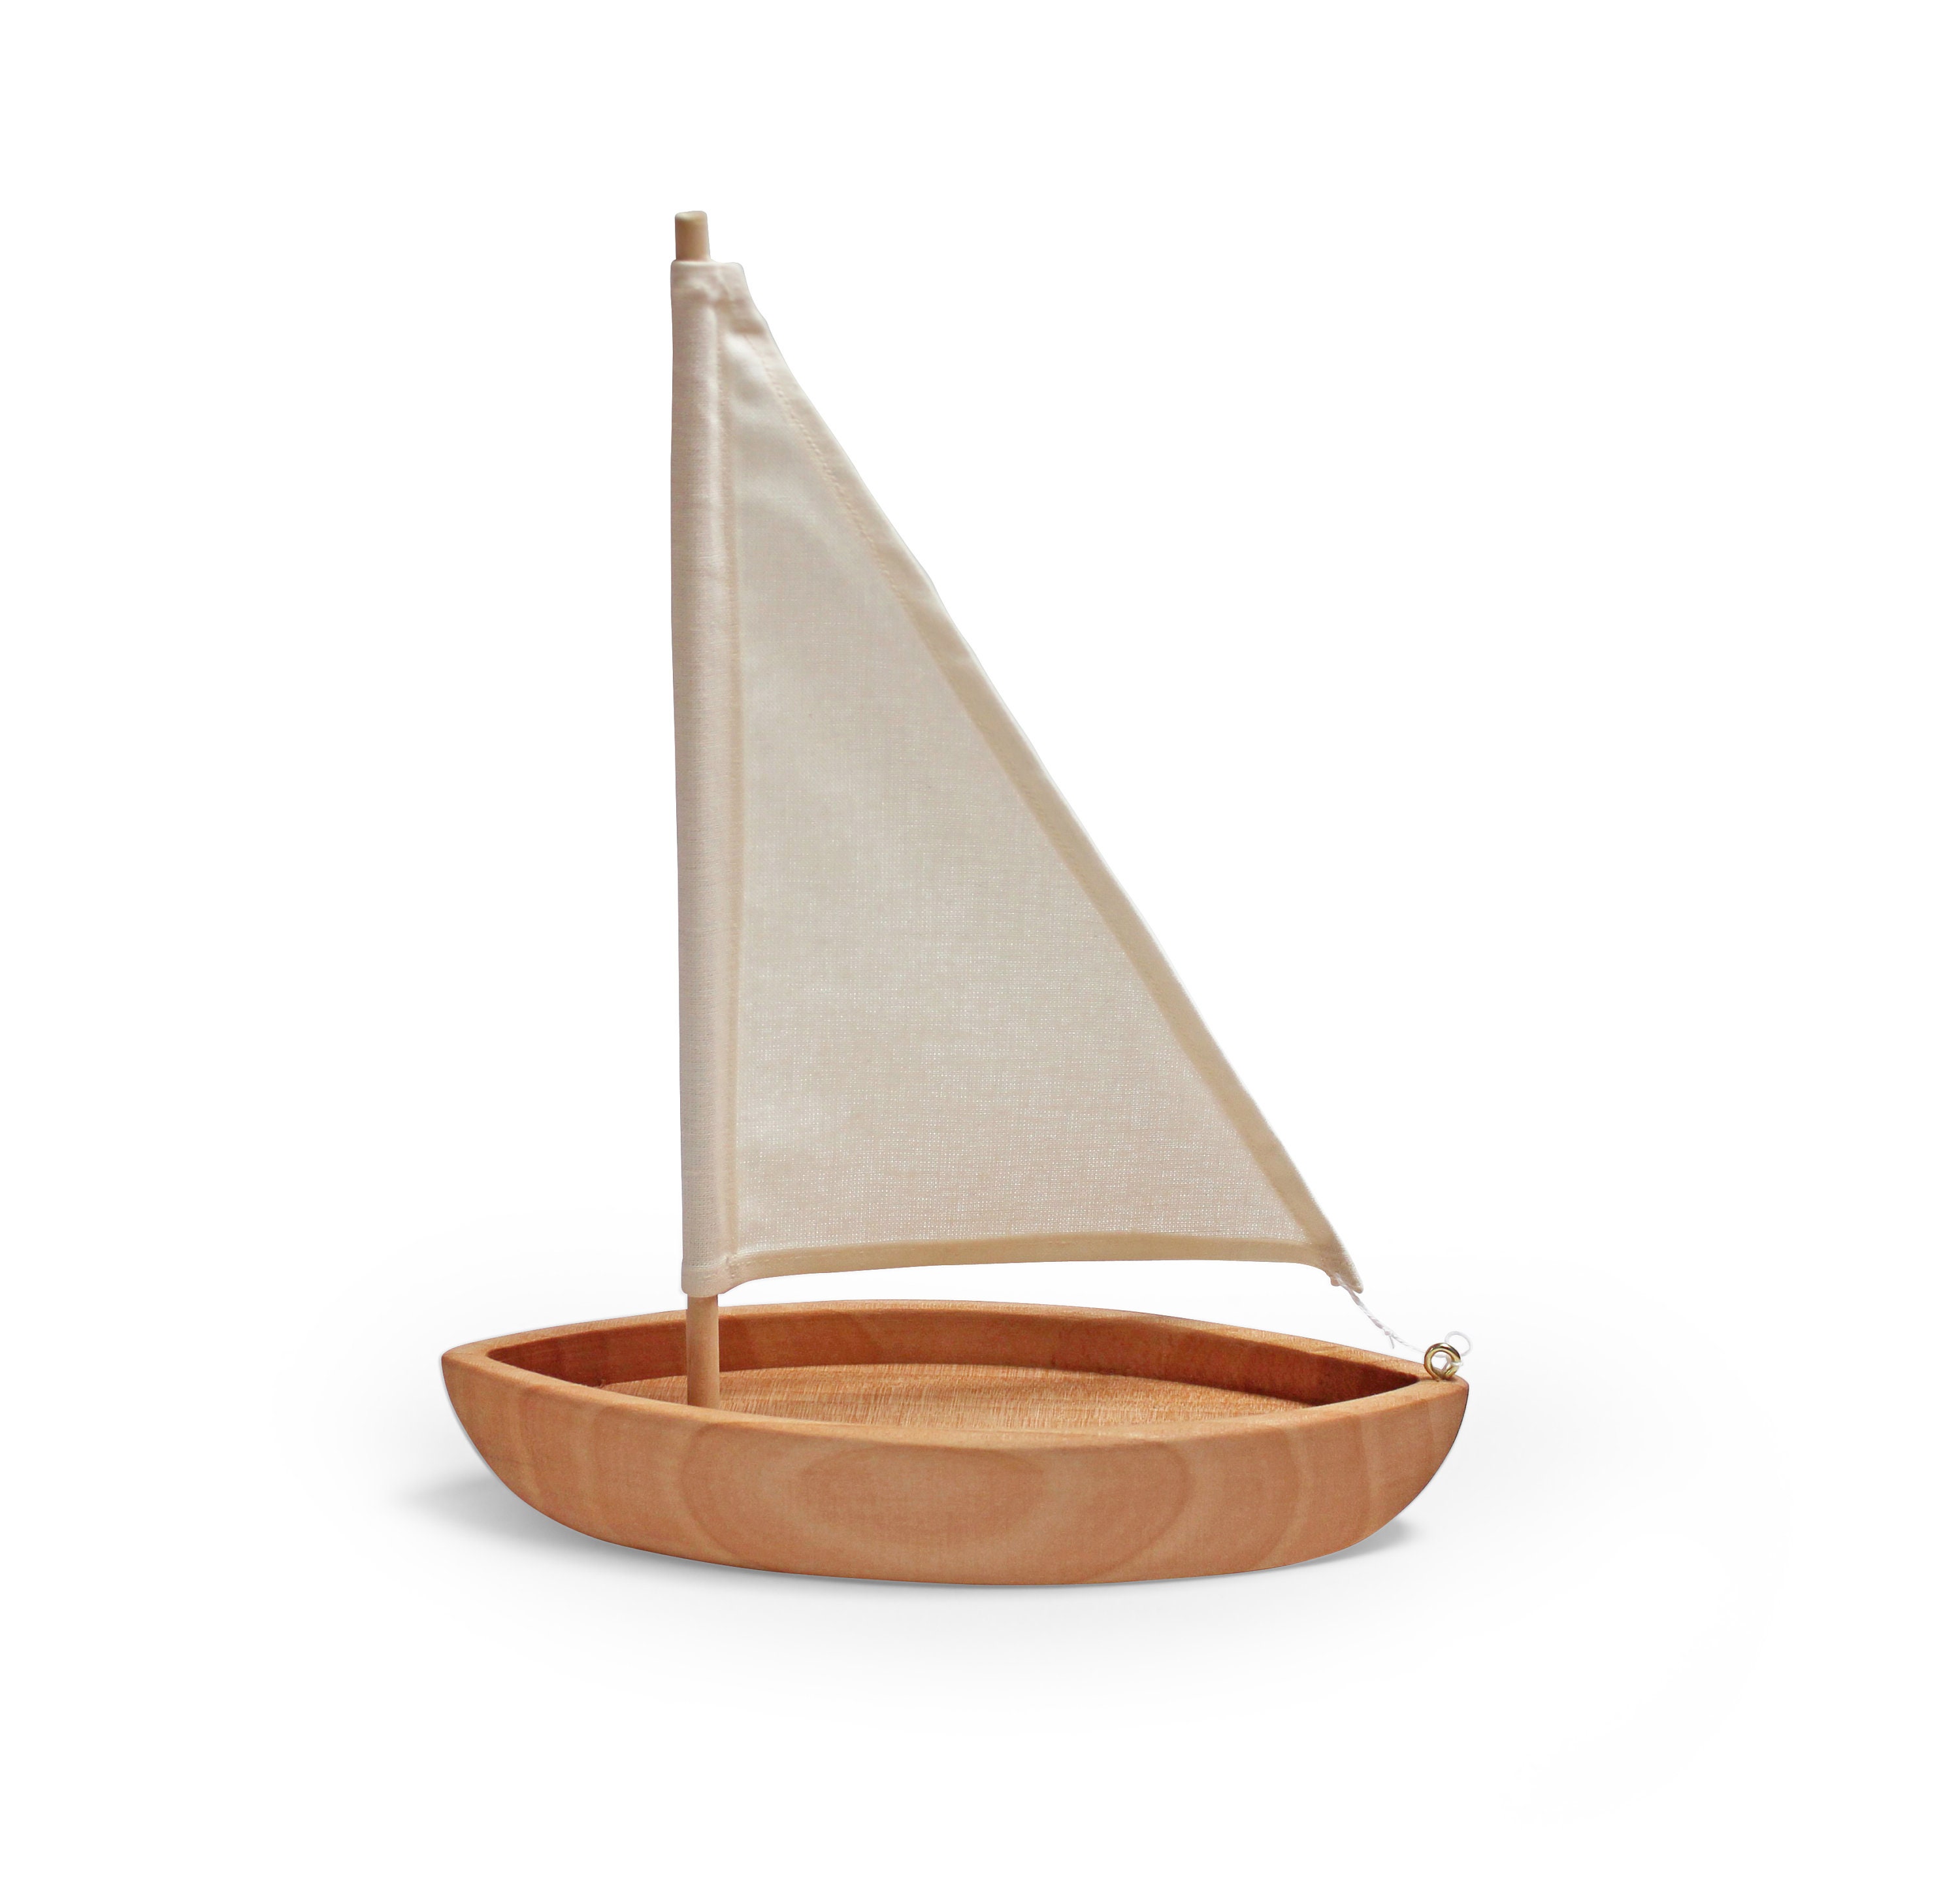 Wooden Toy Boat Sailboat Boat Toy Natural Toy 